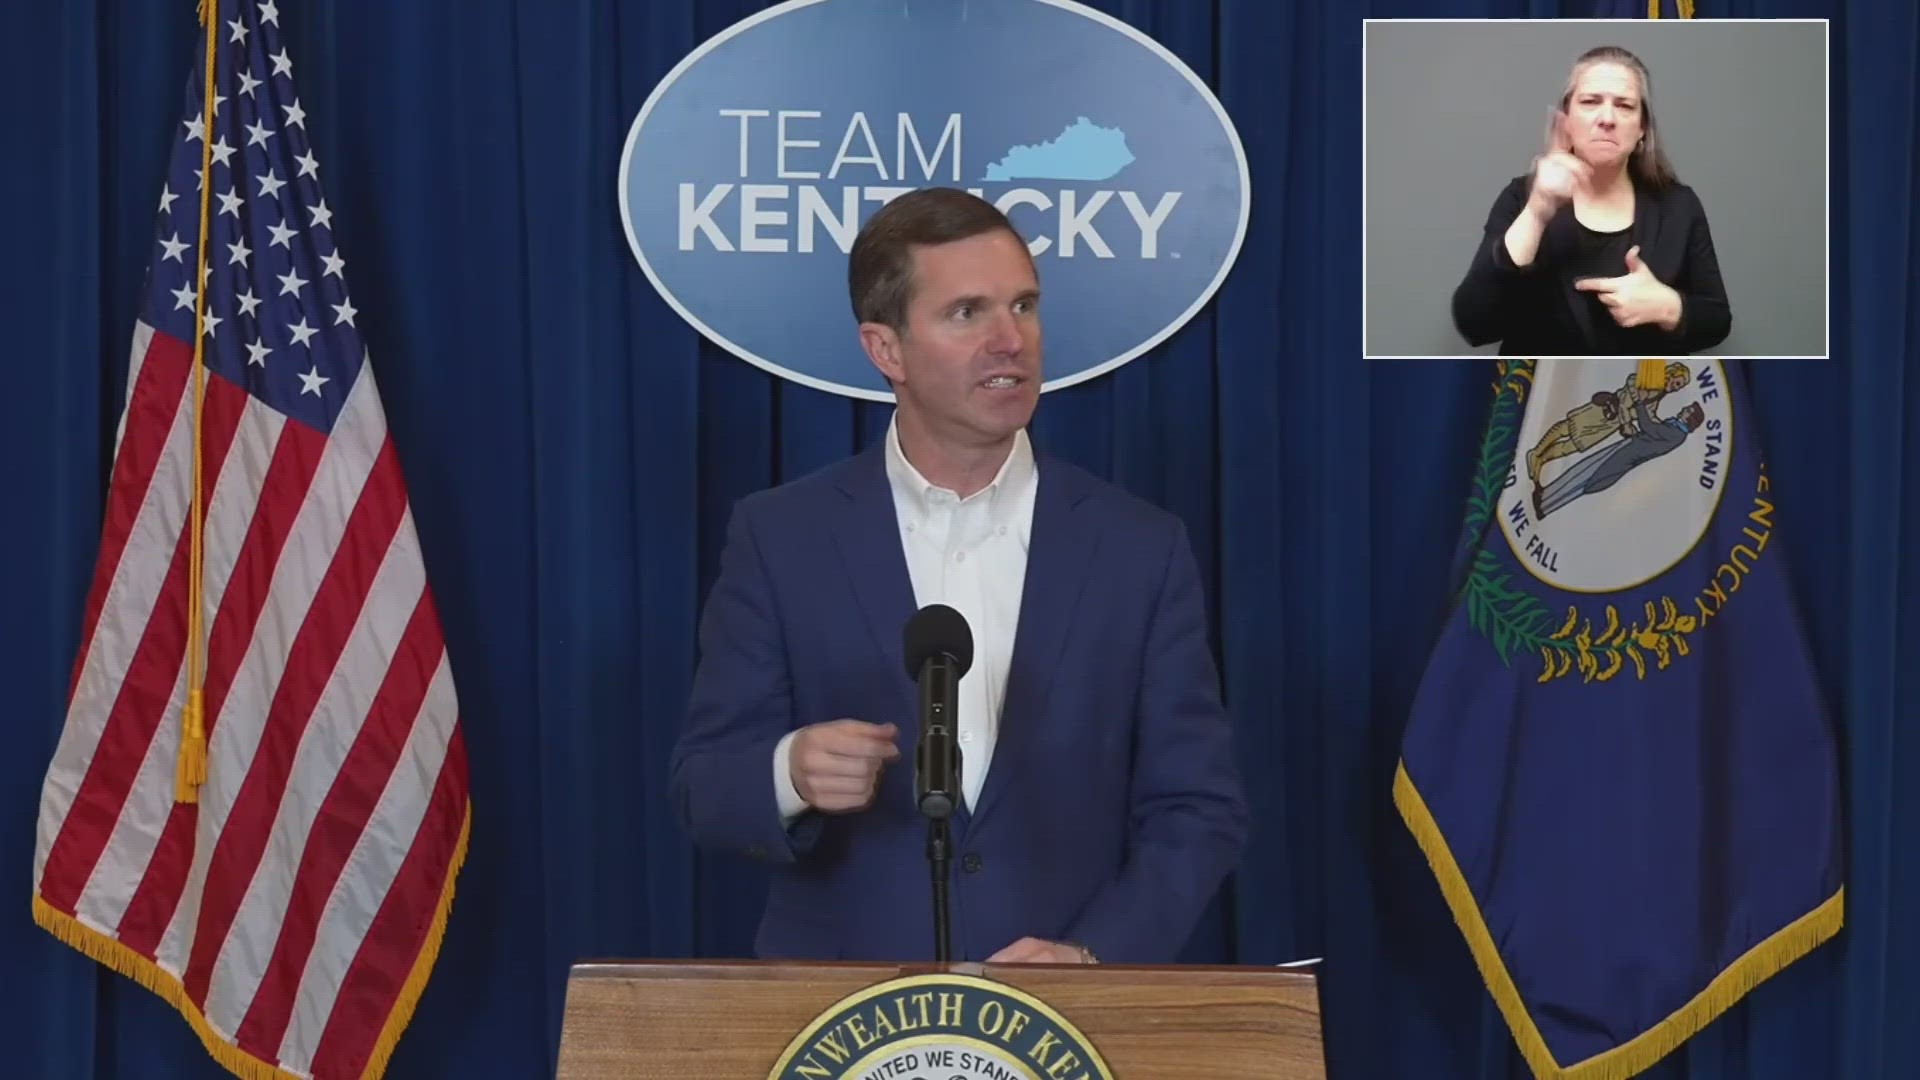 Gov. Andy Beshear said Kentucky's economy has been on a roll these past few years and he said these bills will only help it continue to grow.